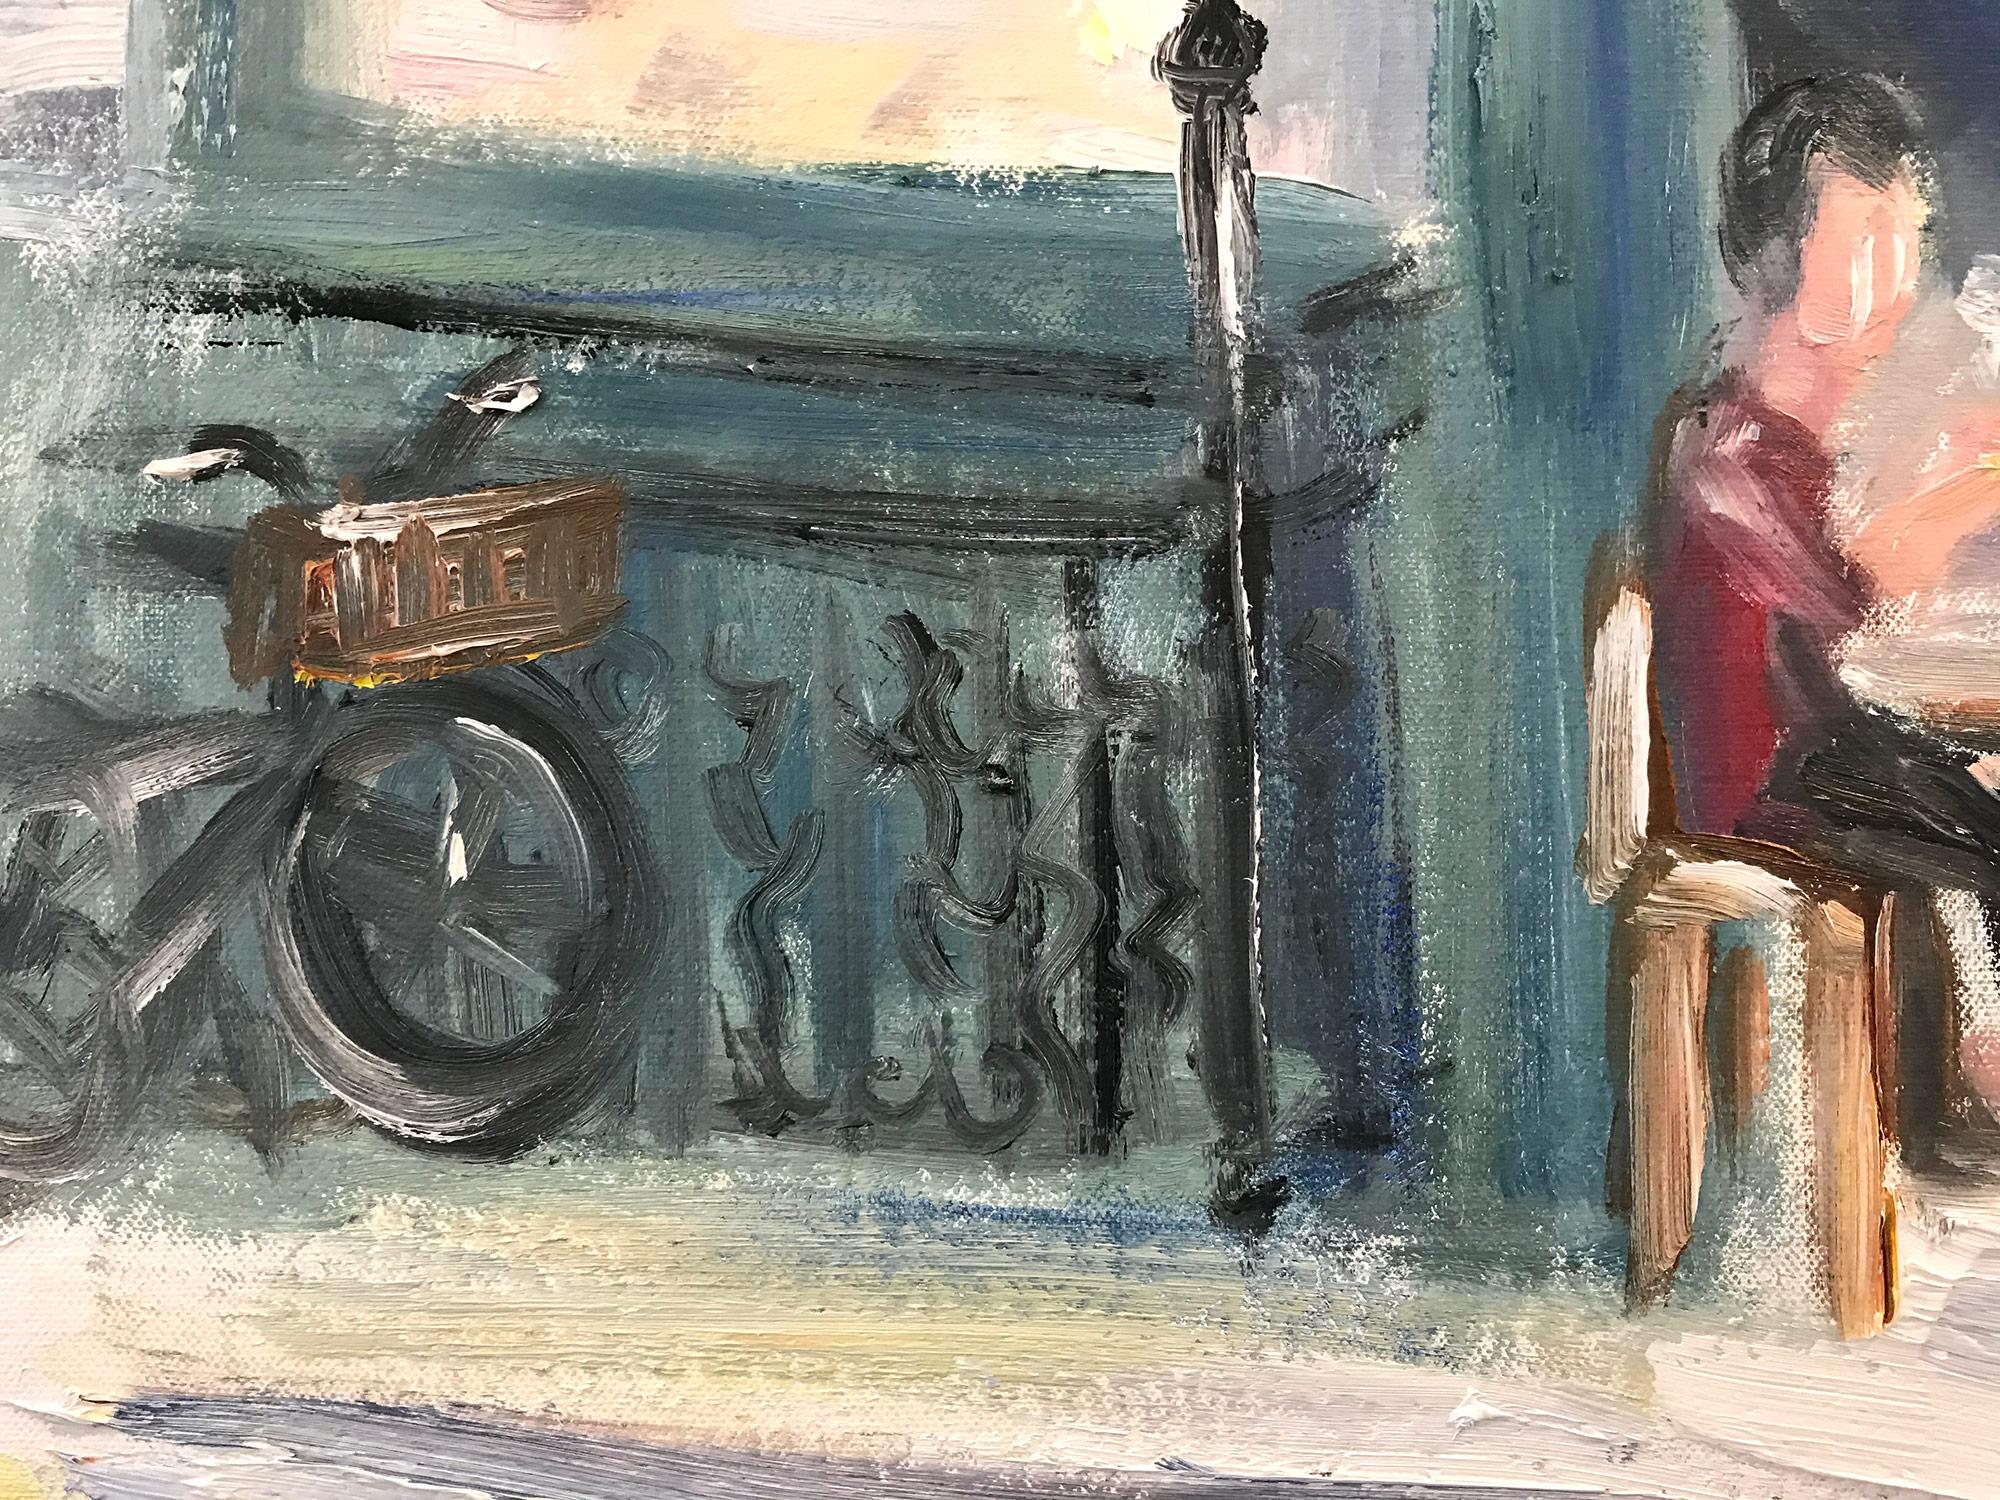 This painting depicts an impressionistic scene of Brunch at Tartine in New York City. Figures are seated having Brunch with drinks in hand on this sunny day. We can feel the texture of the paint, as the artist uses thick brush strokes to capture the